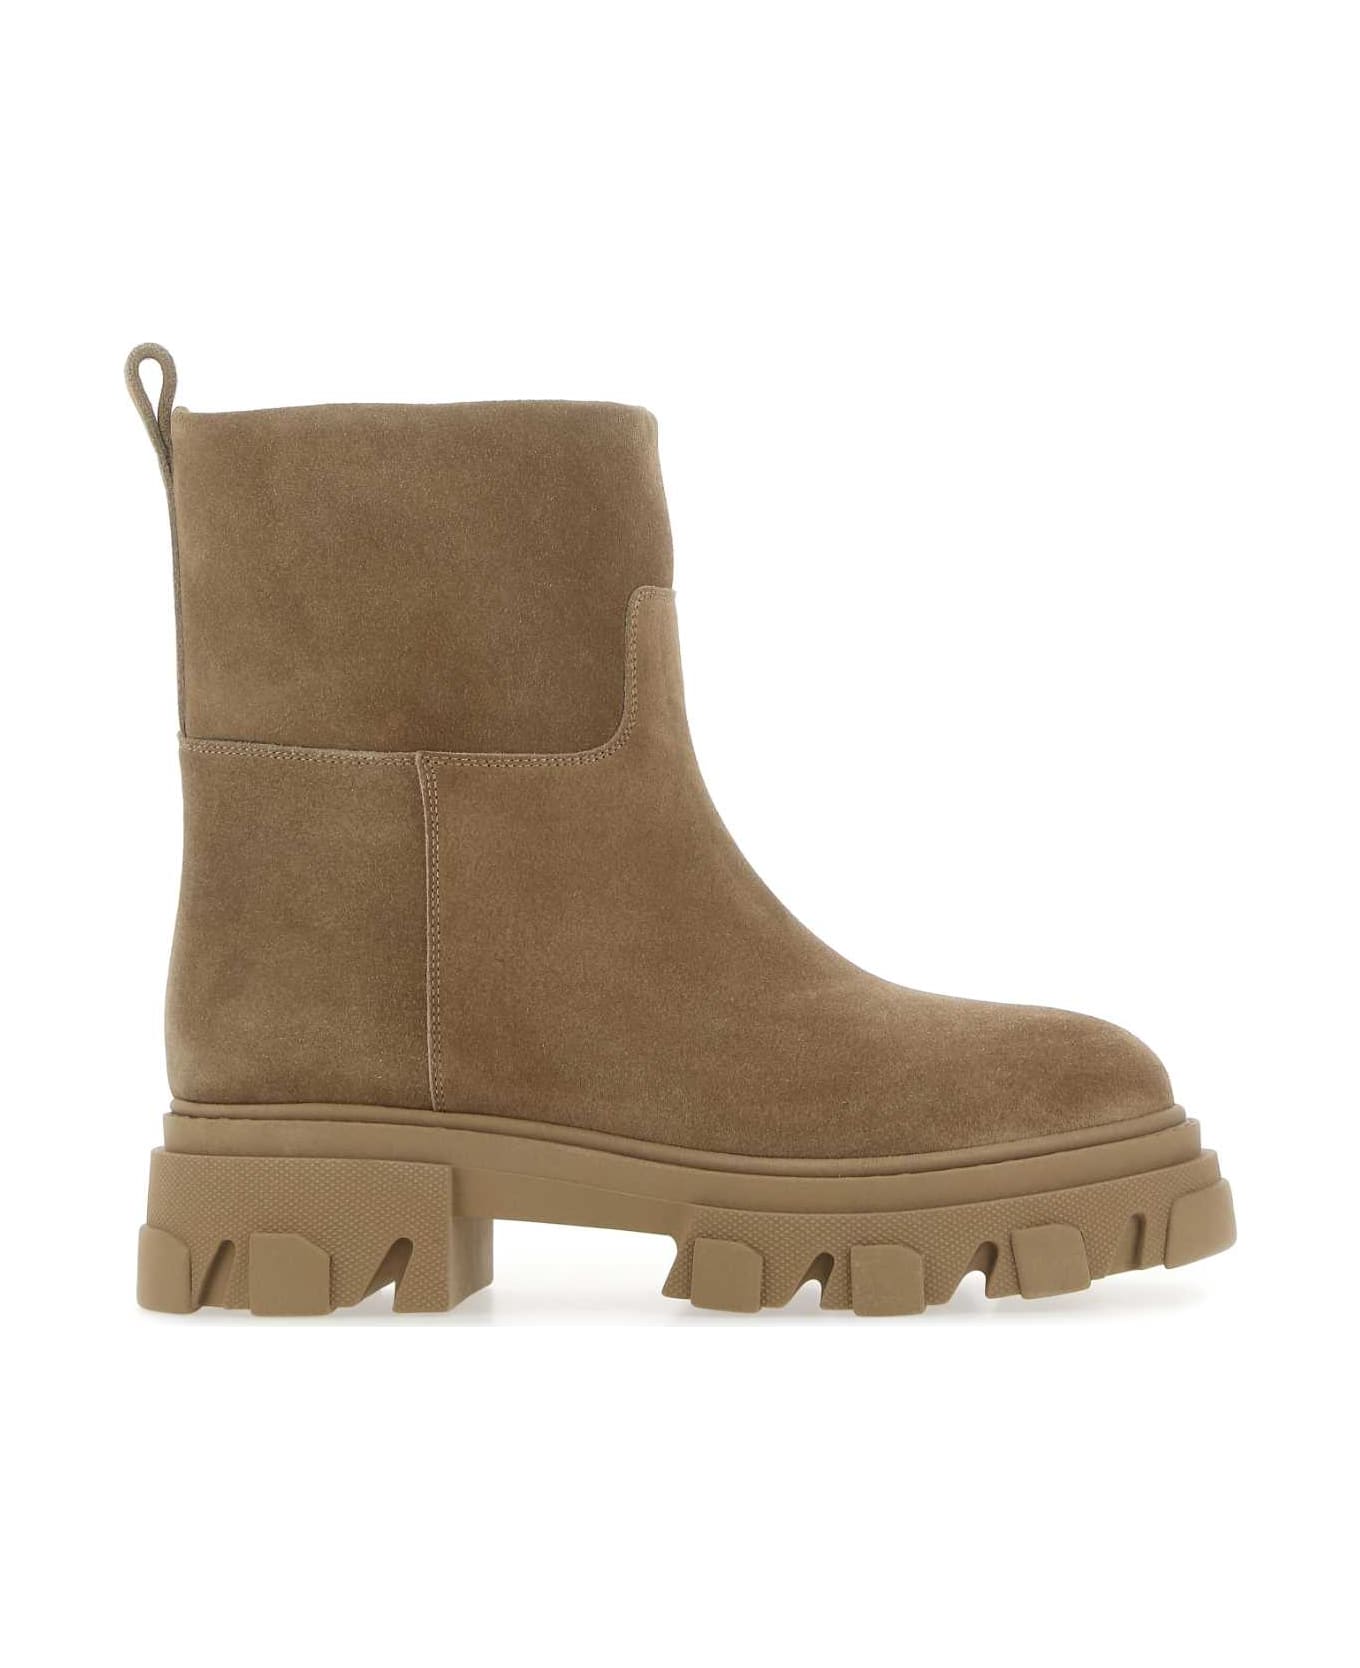 GIA BORGHINI Biscuit Suede Ankle Boots - 4750 ブーツ